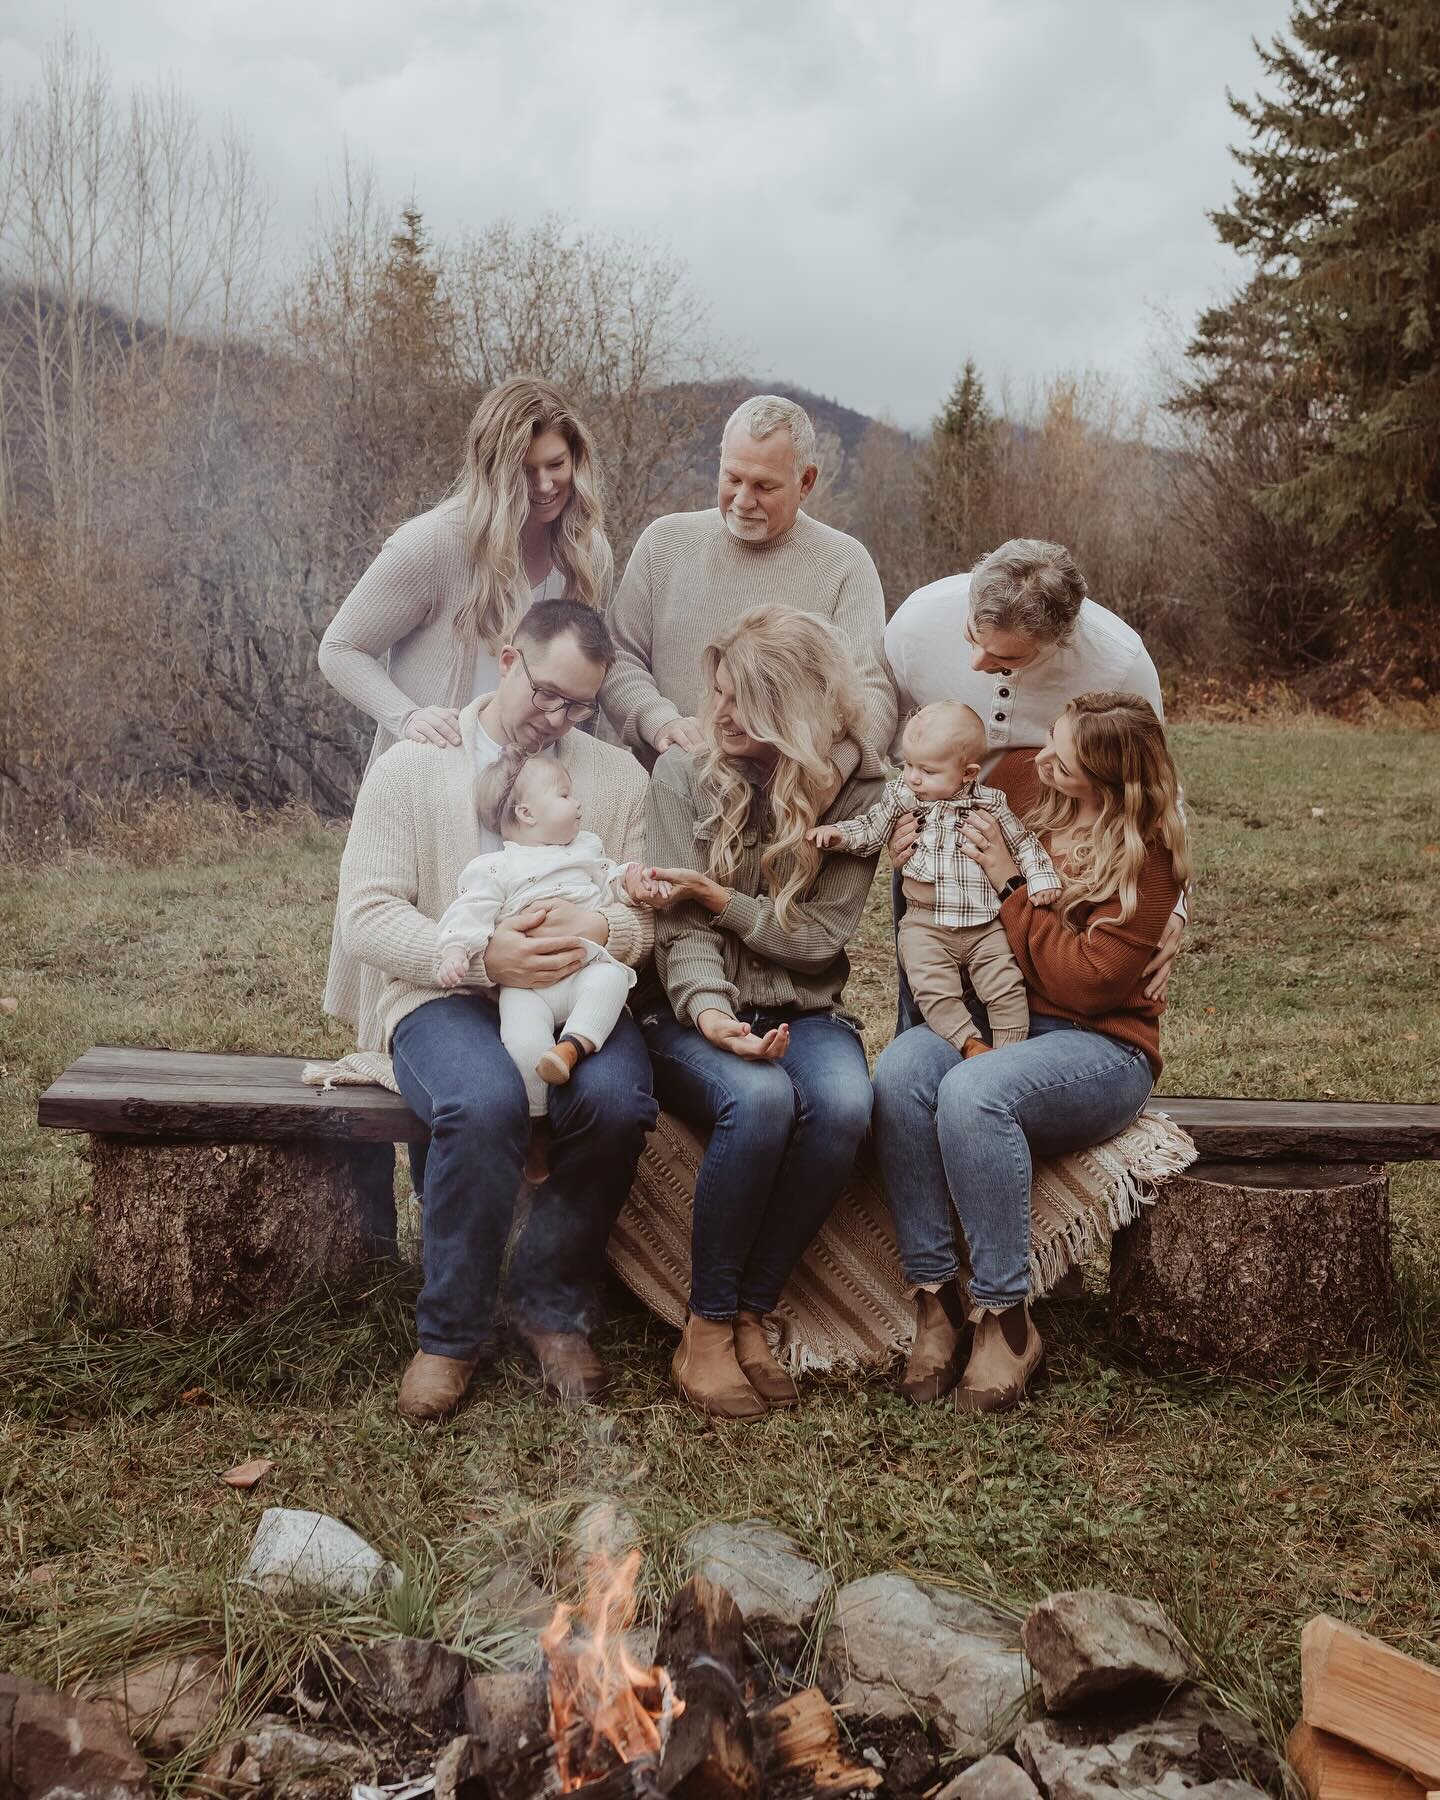 🌟 The real MVPs of life? Family! Sure, my camera is my sidekick, but capturing your crazy, wonderful extended family moments? Now, that&rsquo;s the ultimate masterpiece! 📸💖 From grandparents sharing their wisdom, to adorable grandbabies stealing t